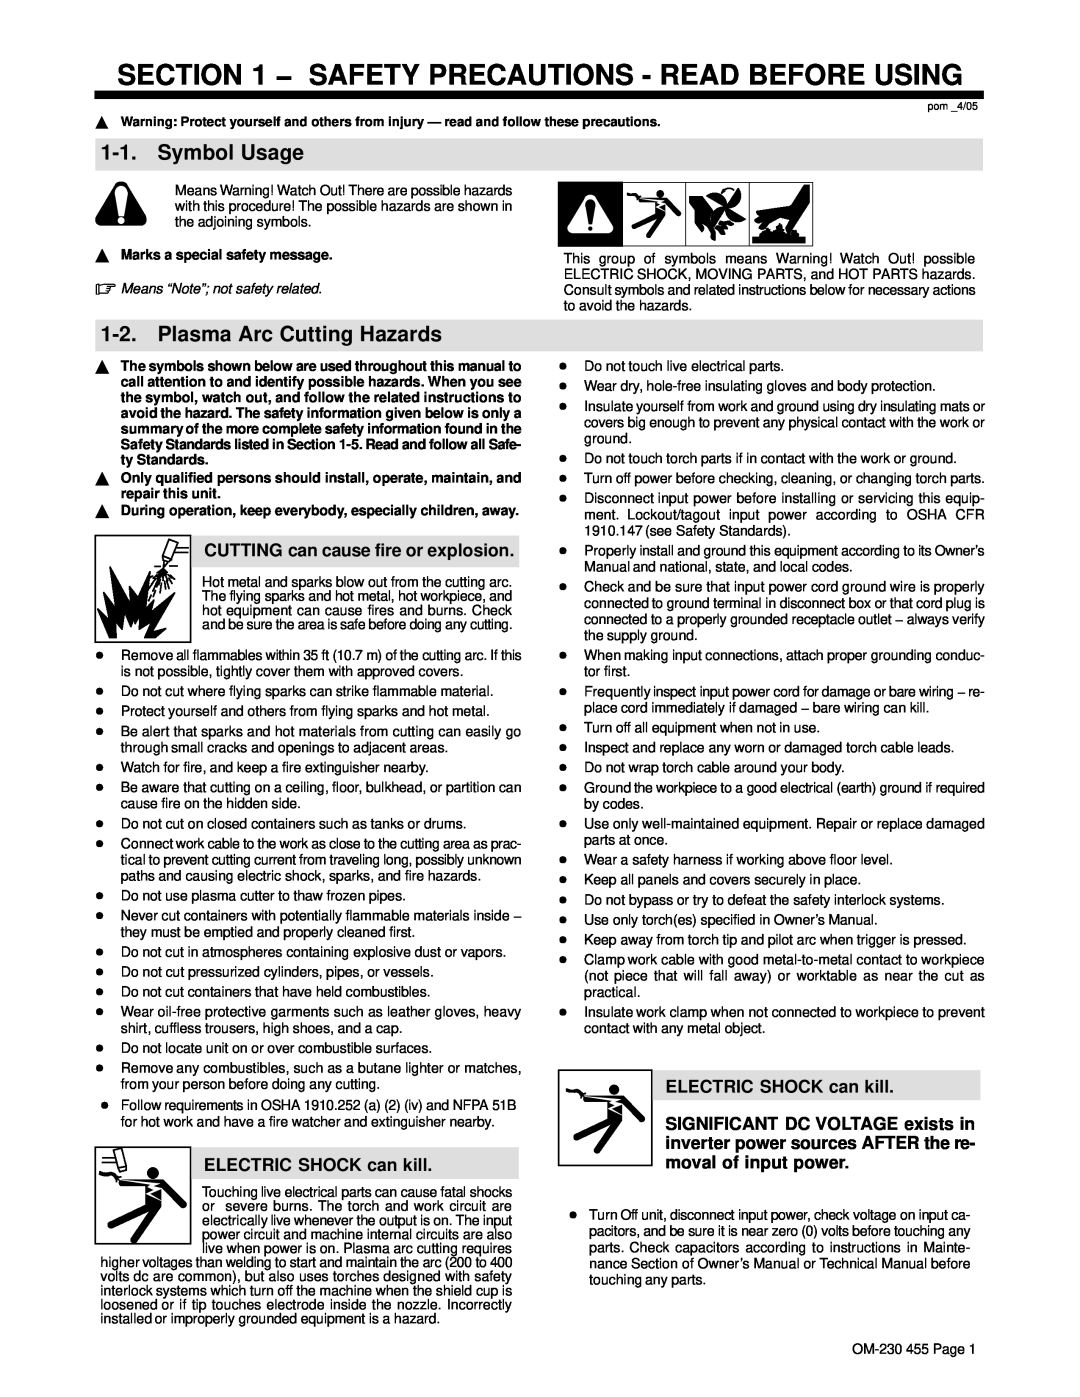 Hobart Welding Products OM-230 455D manual Symbol Usage, Plasma Arc Cutting Hazards, Safety Precautions - Read Before Using 